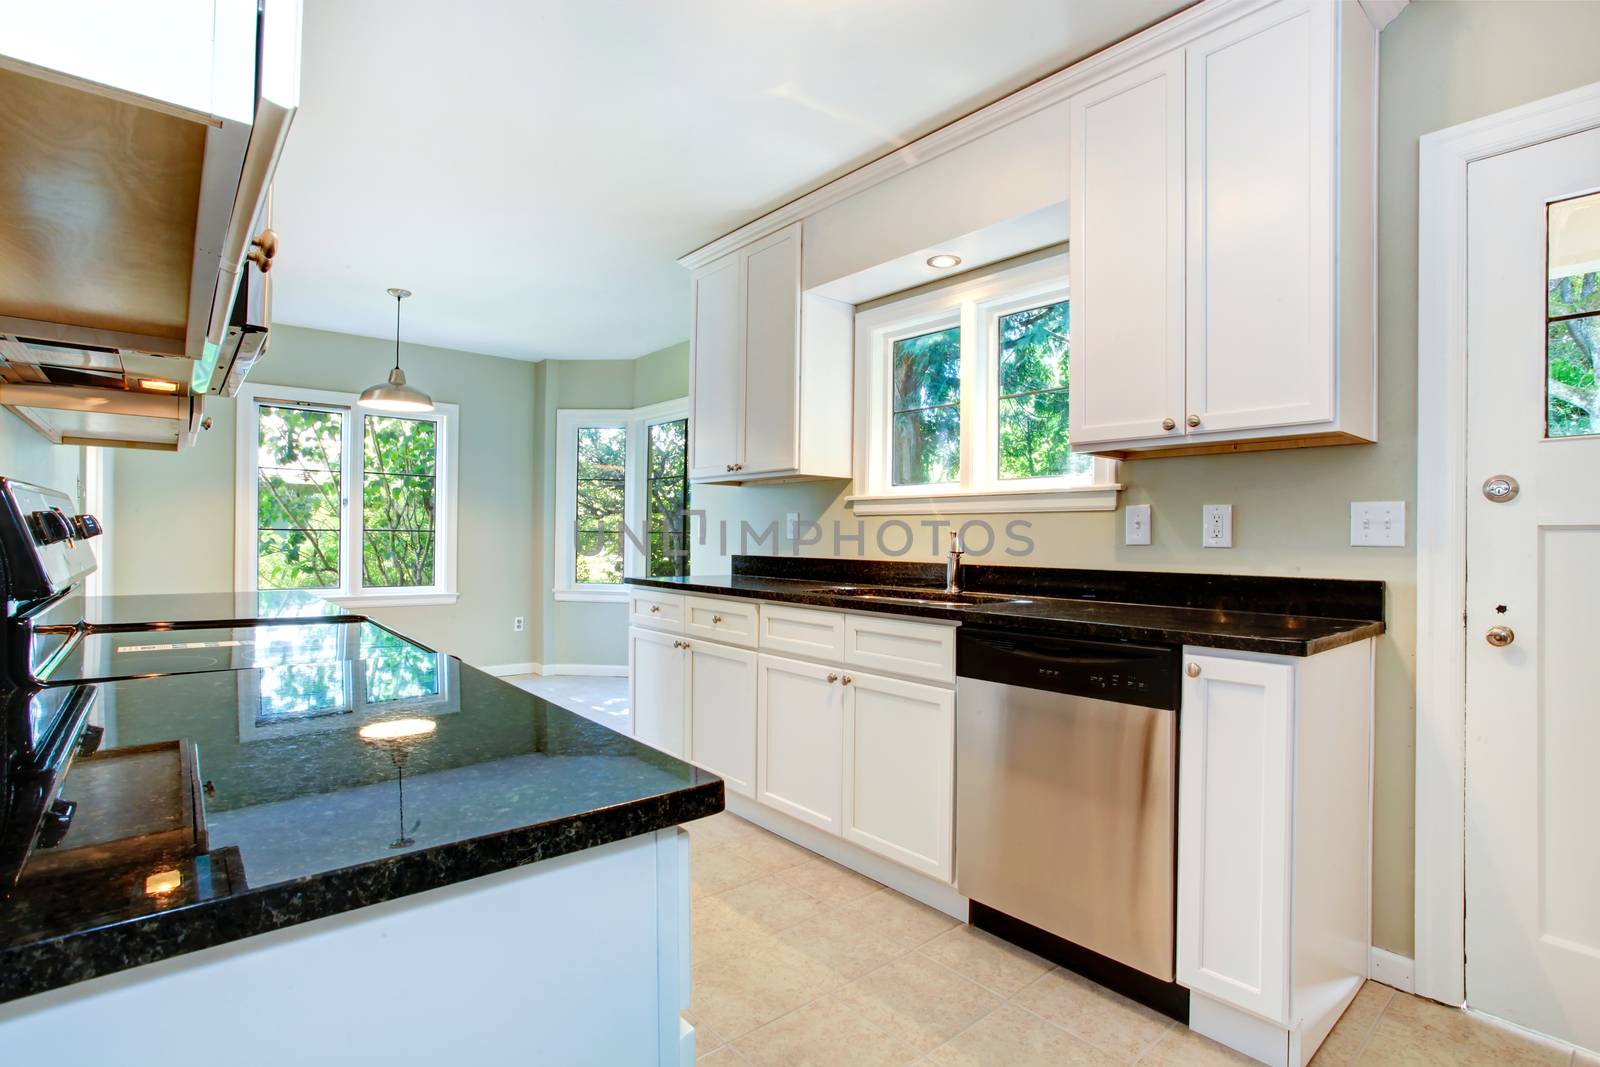 White ktichen cabinets with black granite tops and steel dish washer. Kitchen with empty dining area